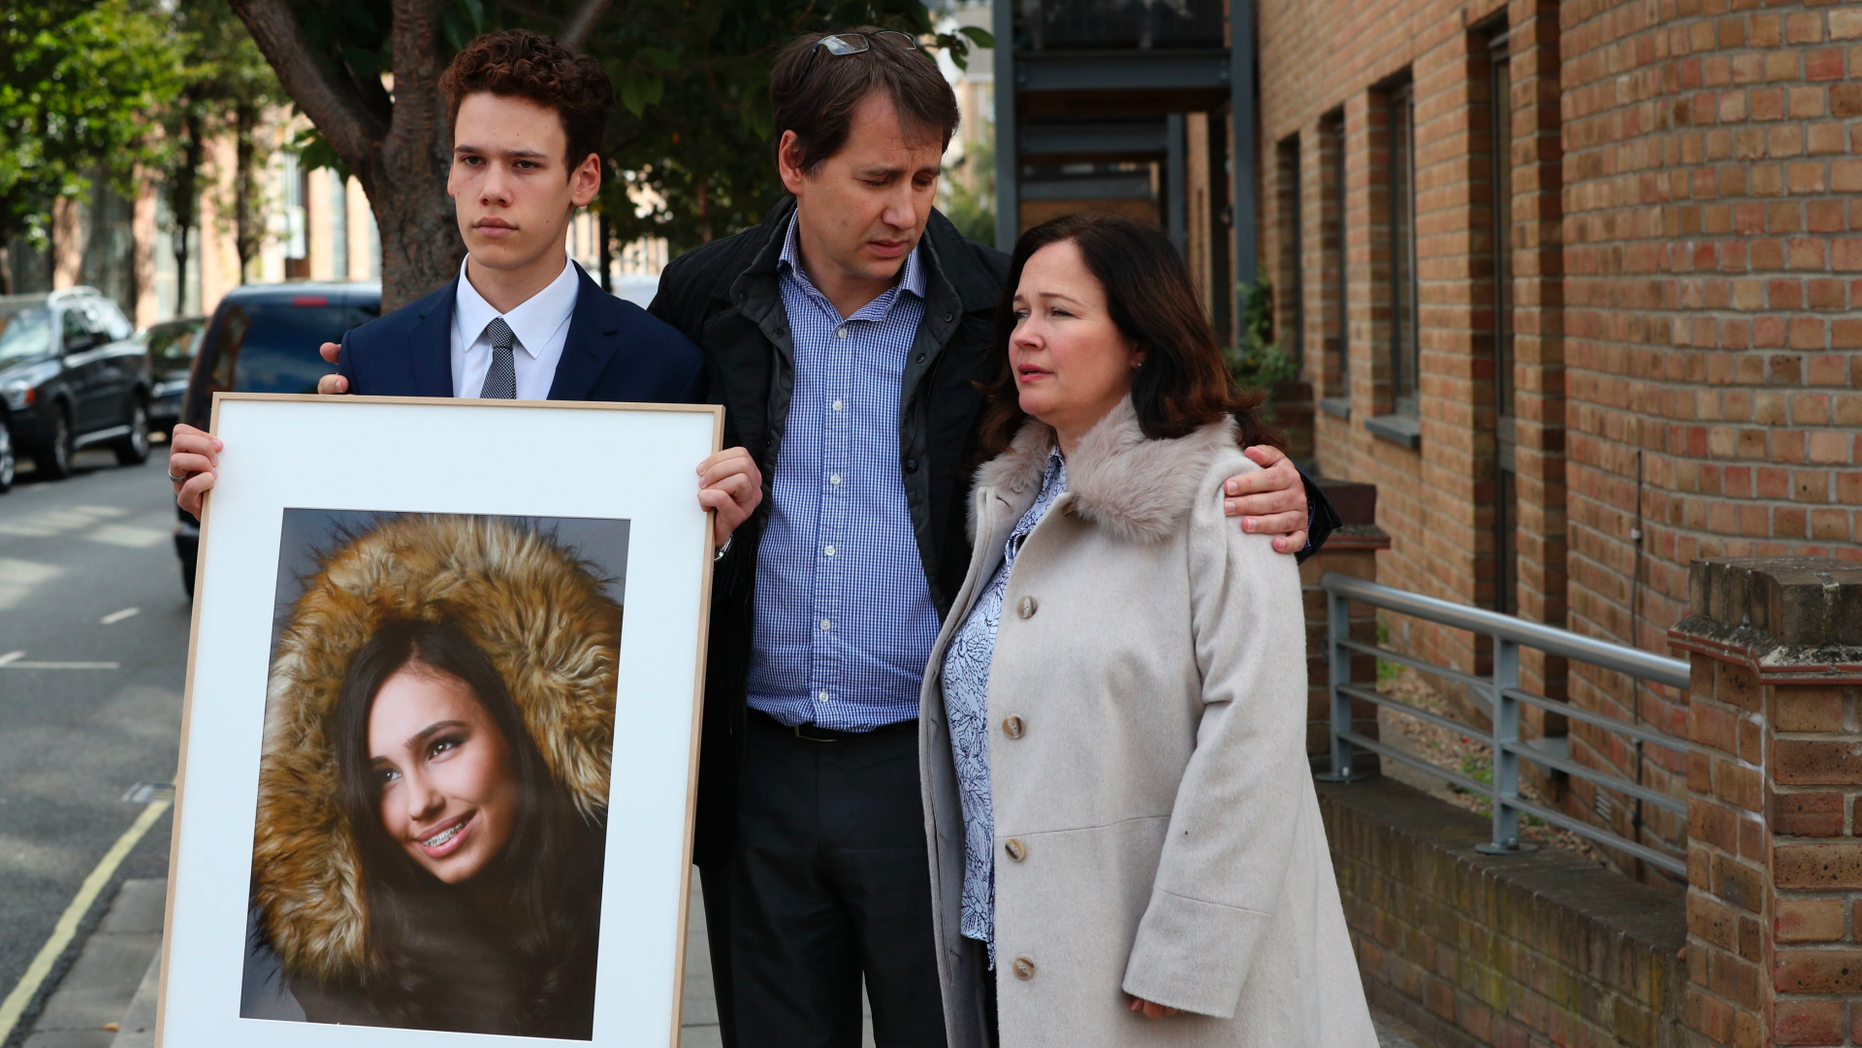 Nadim and Tanya Ednan-Laperouse, along with their son Alex, prepare to speak to the media in London's Coroners Court on Friday, September 28, 2018, following the death investigation. of 15 year old Natasha Ednan-Laperouse, appearing on the poster, who died after suffering a life-threatening allergic reaction during a flight from London to Nice after eating a sandwich ready to eat at the airport. Heathrow Airport. Natasha's father, Nadim, said Friday that he hoped the death of their daughter could serve as a turning point for making significant changes to the labeling of allergies on food packaging. (Jonathan Brady / PA via AP)